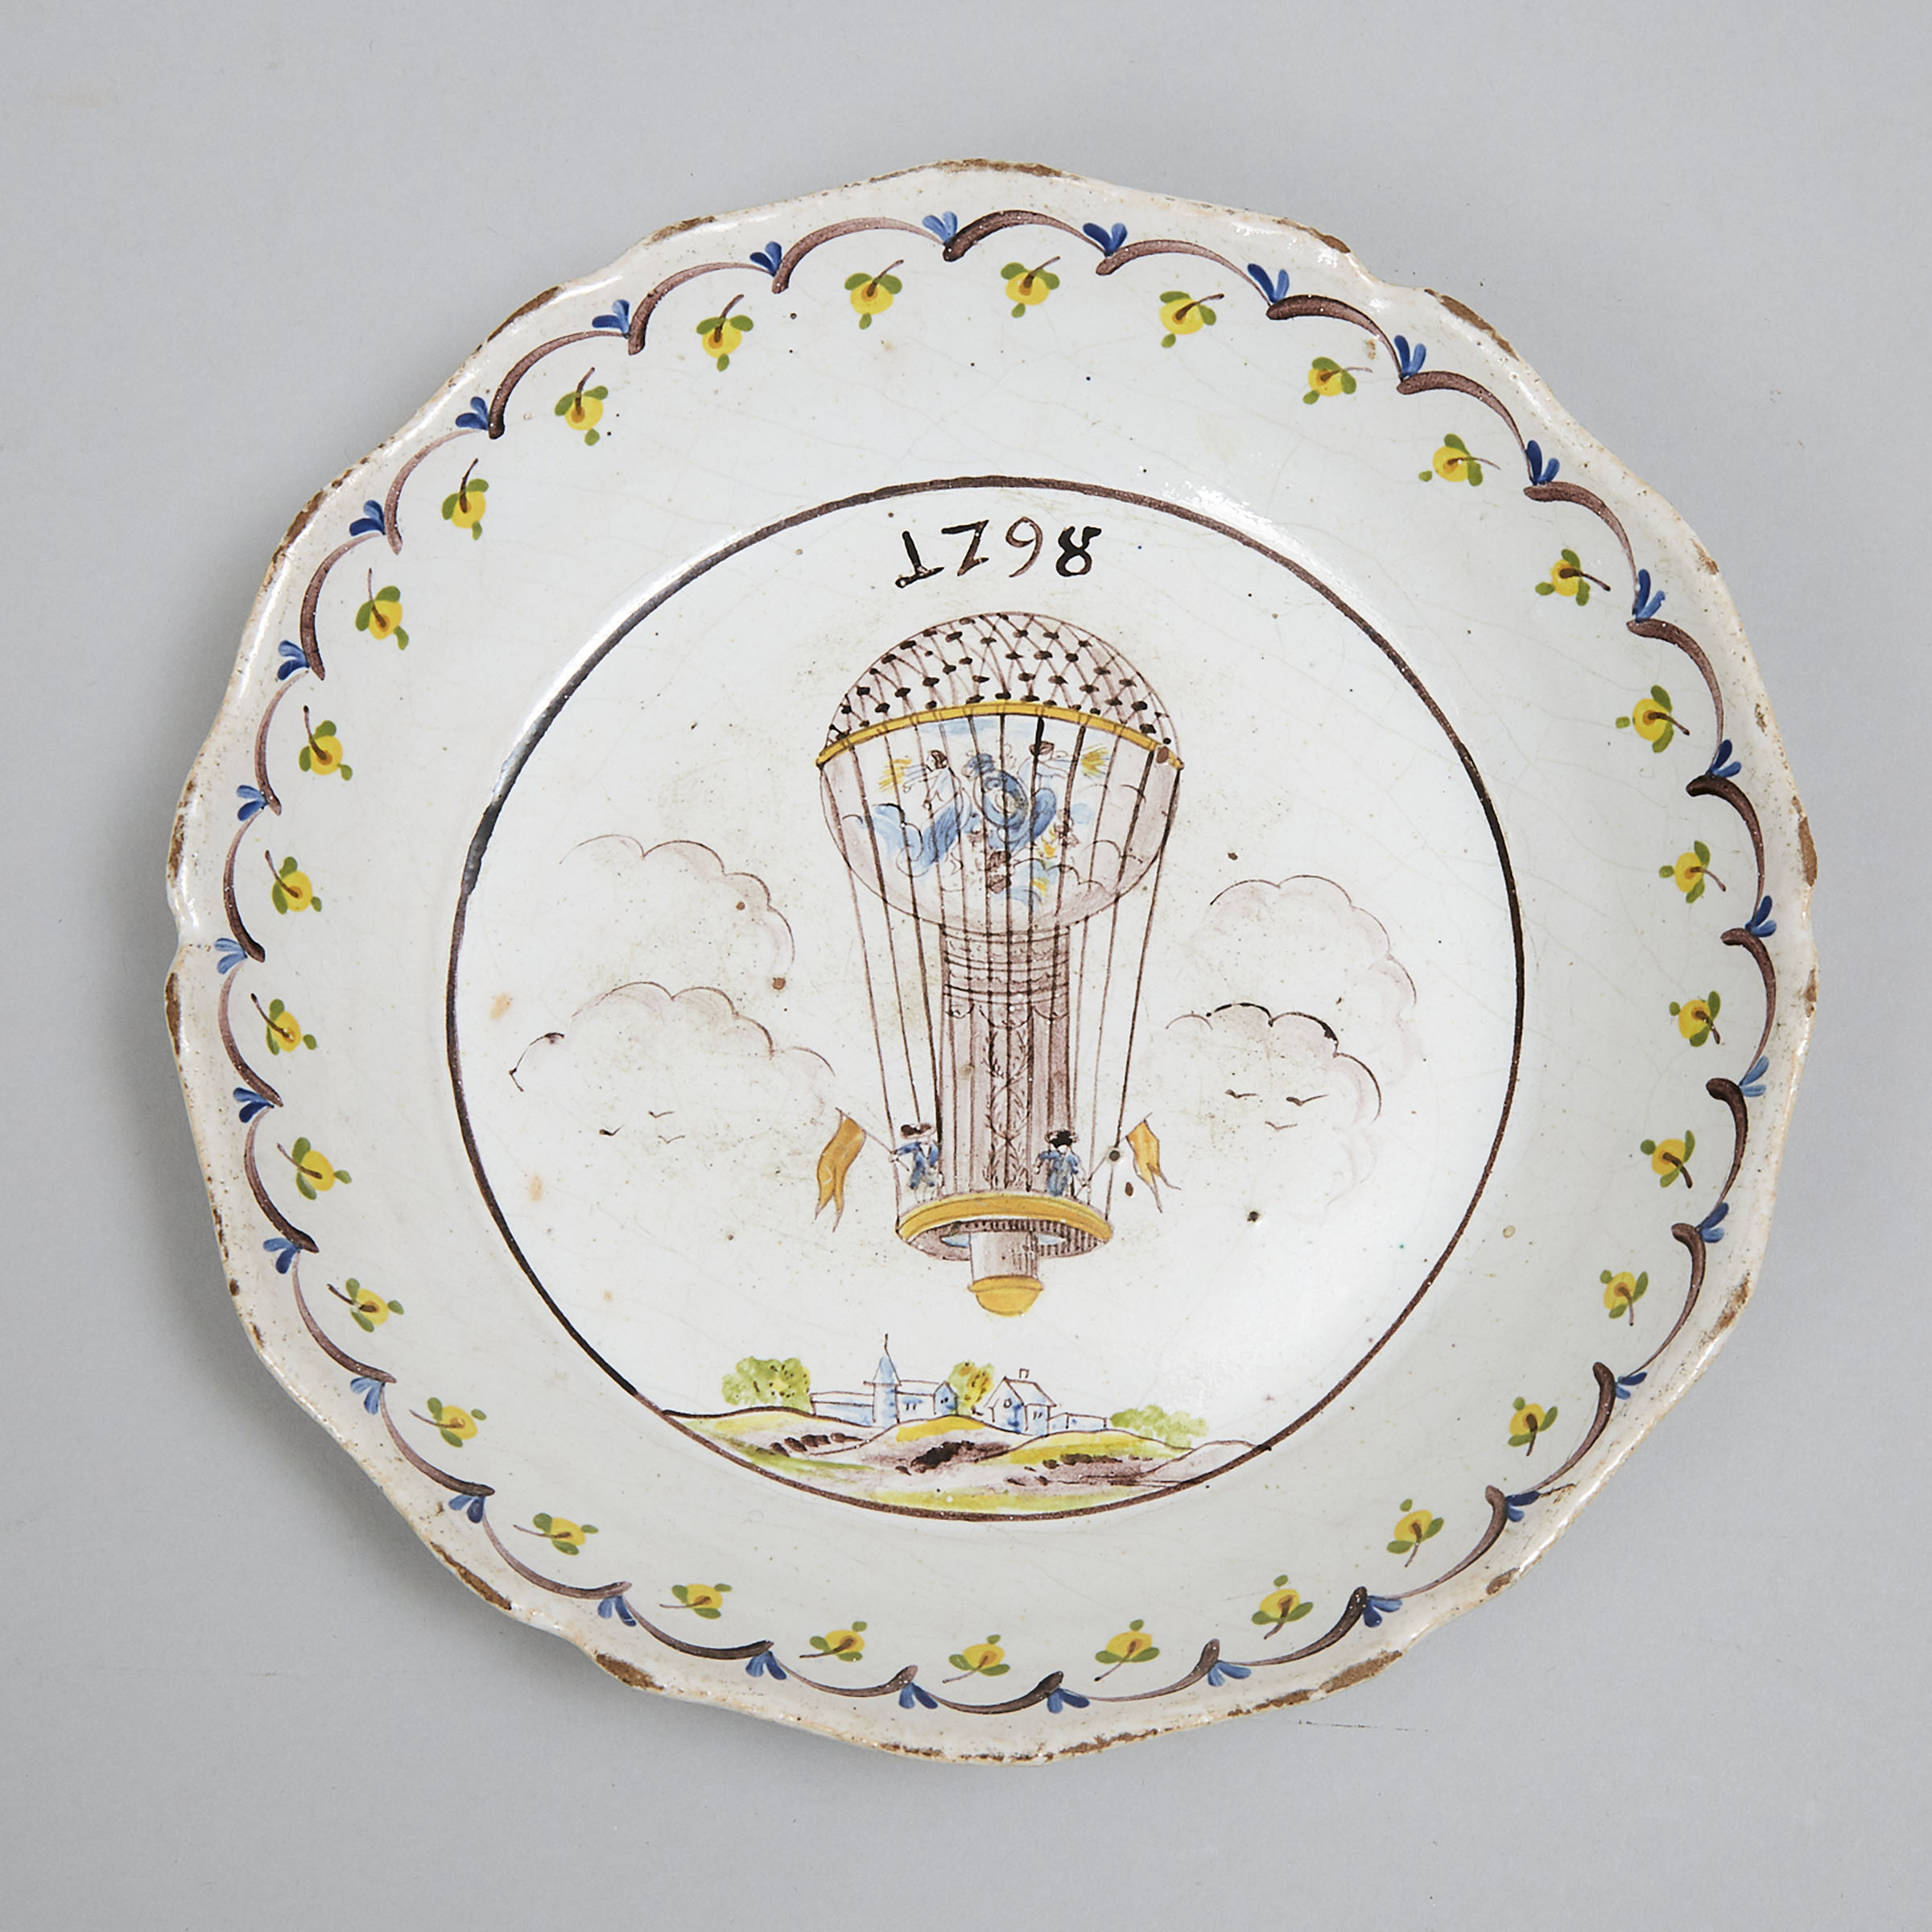 French Faience Hot Air Balloon Plate, dated 1798